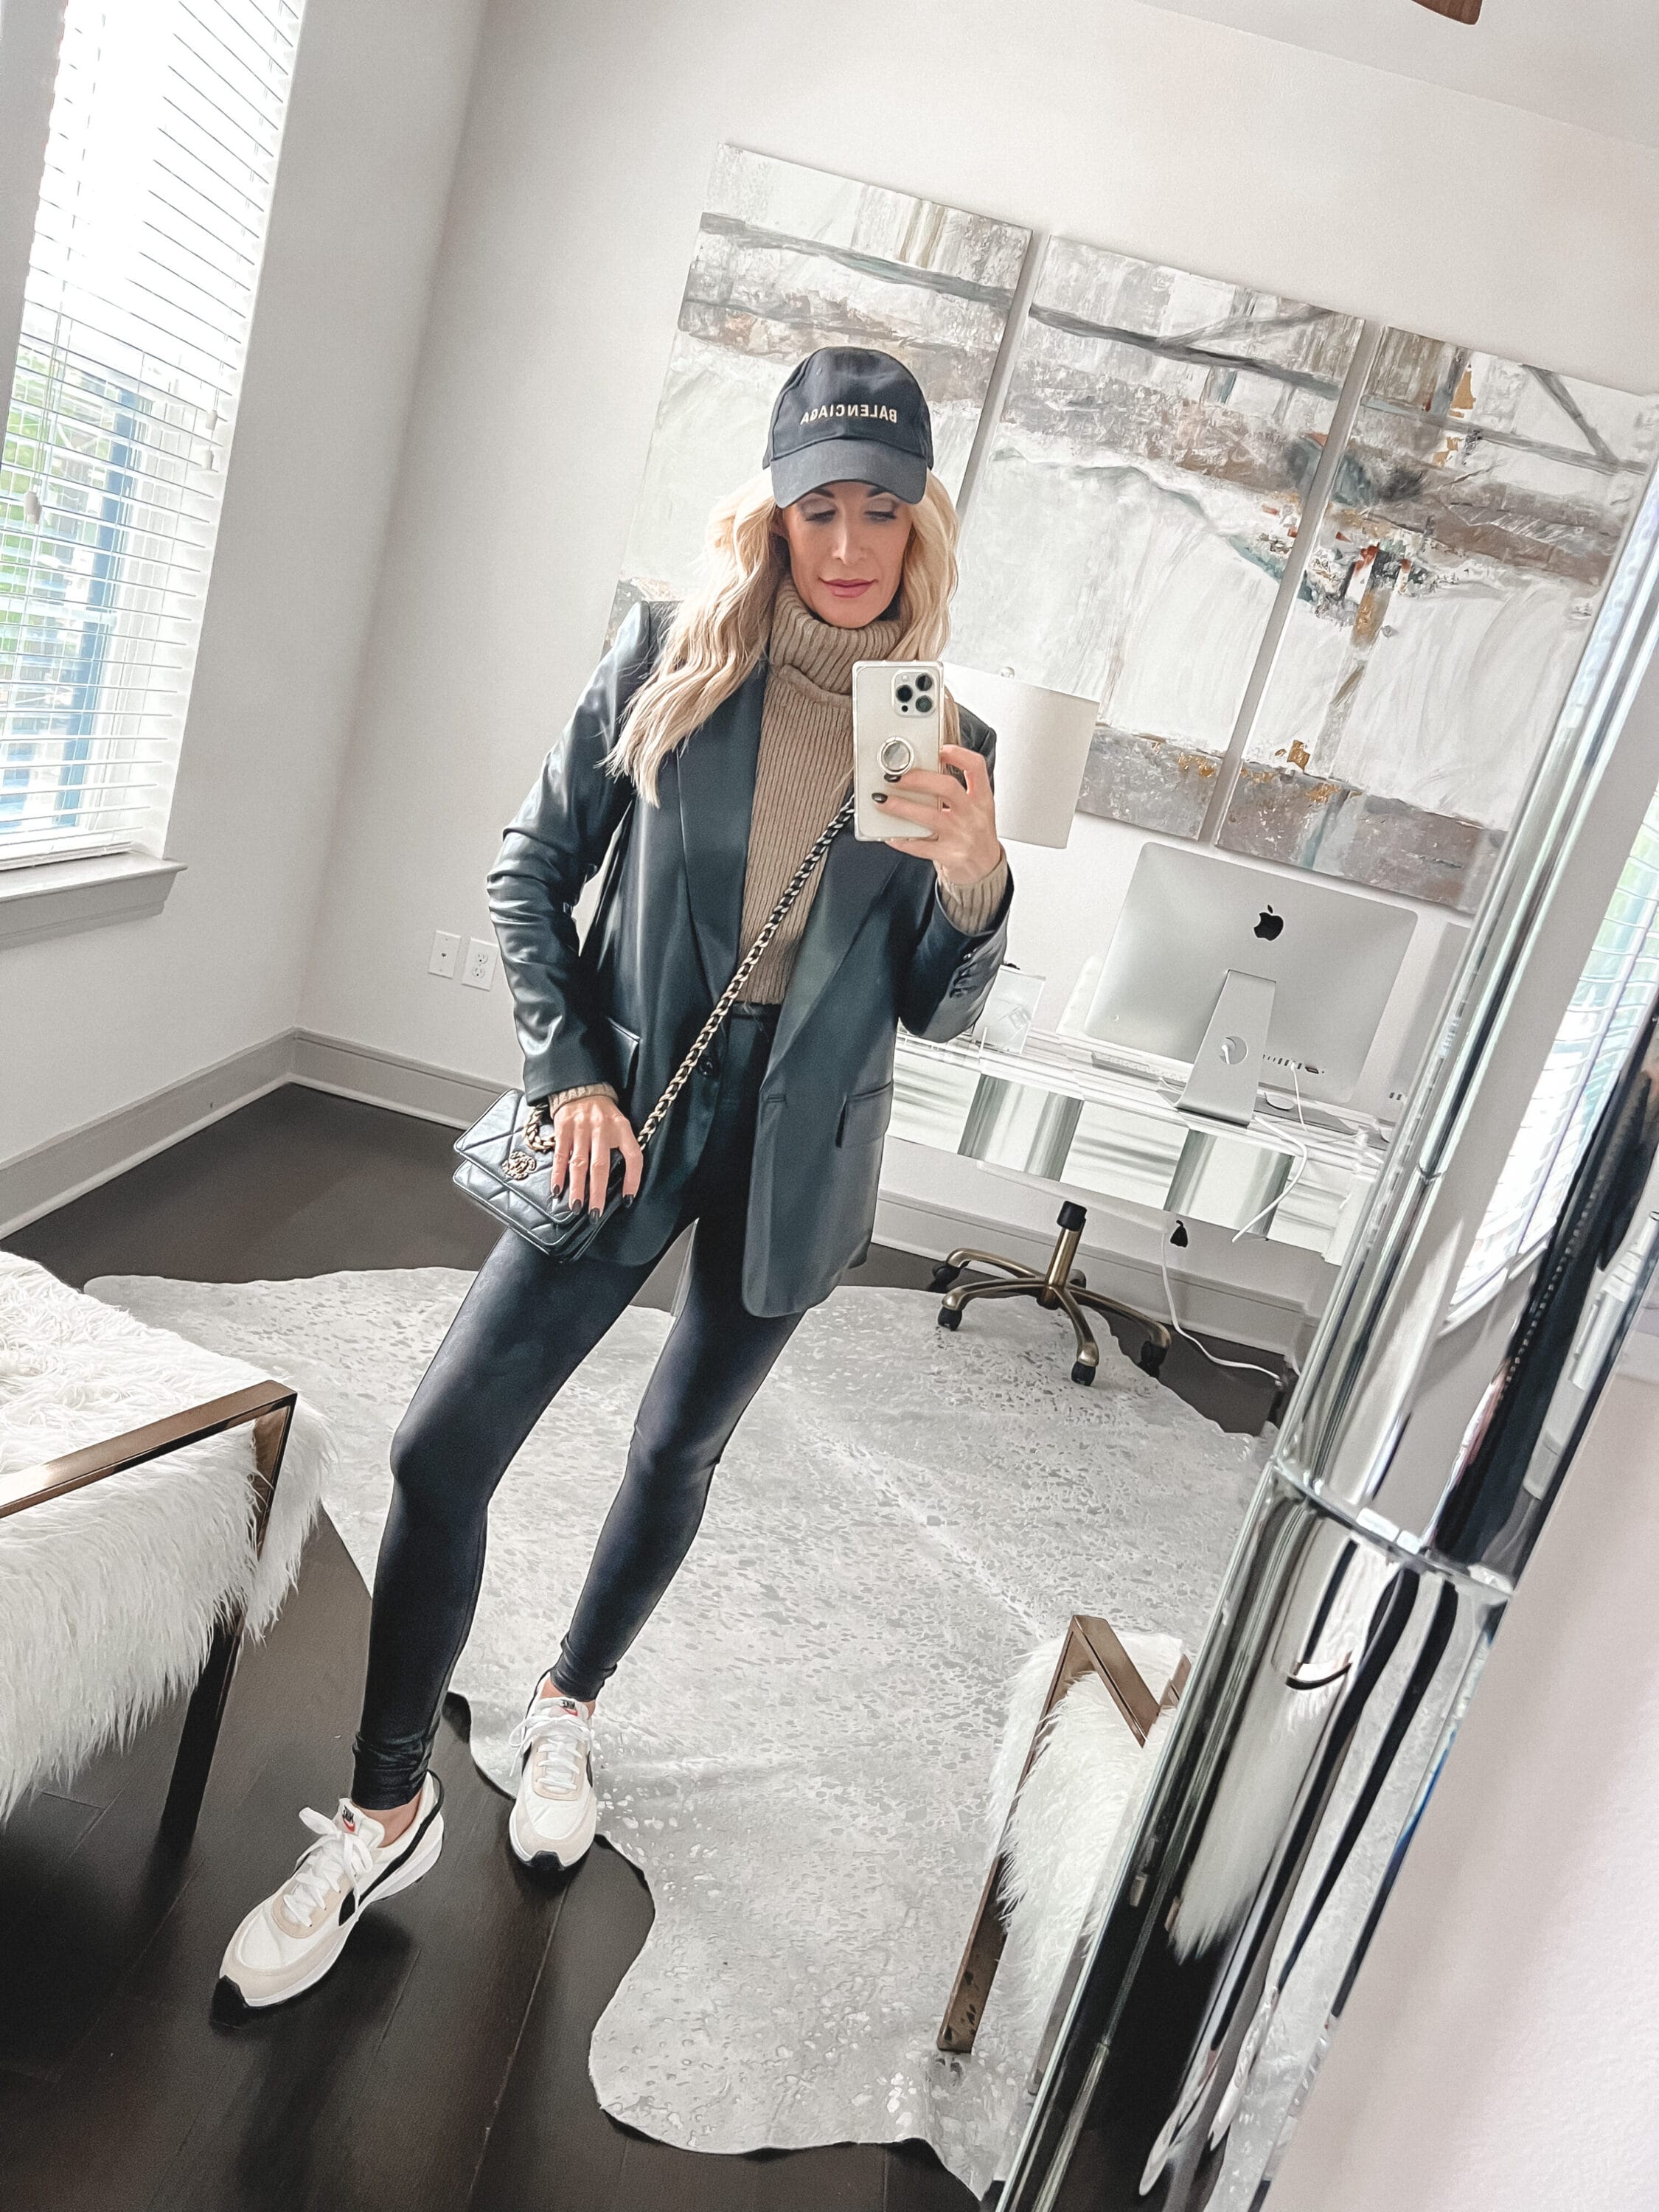 Dallas fashion blogger over 40 wearing athlesiure items featured in the best cyber Monday sales of 2022.